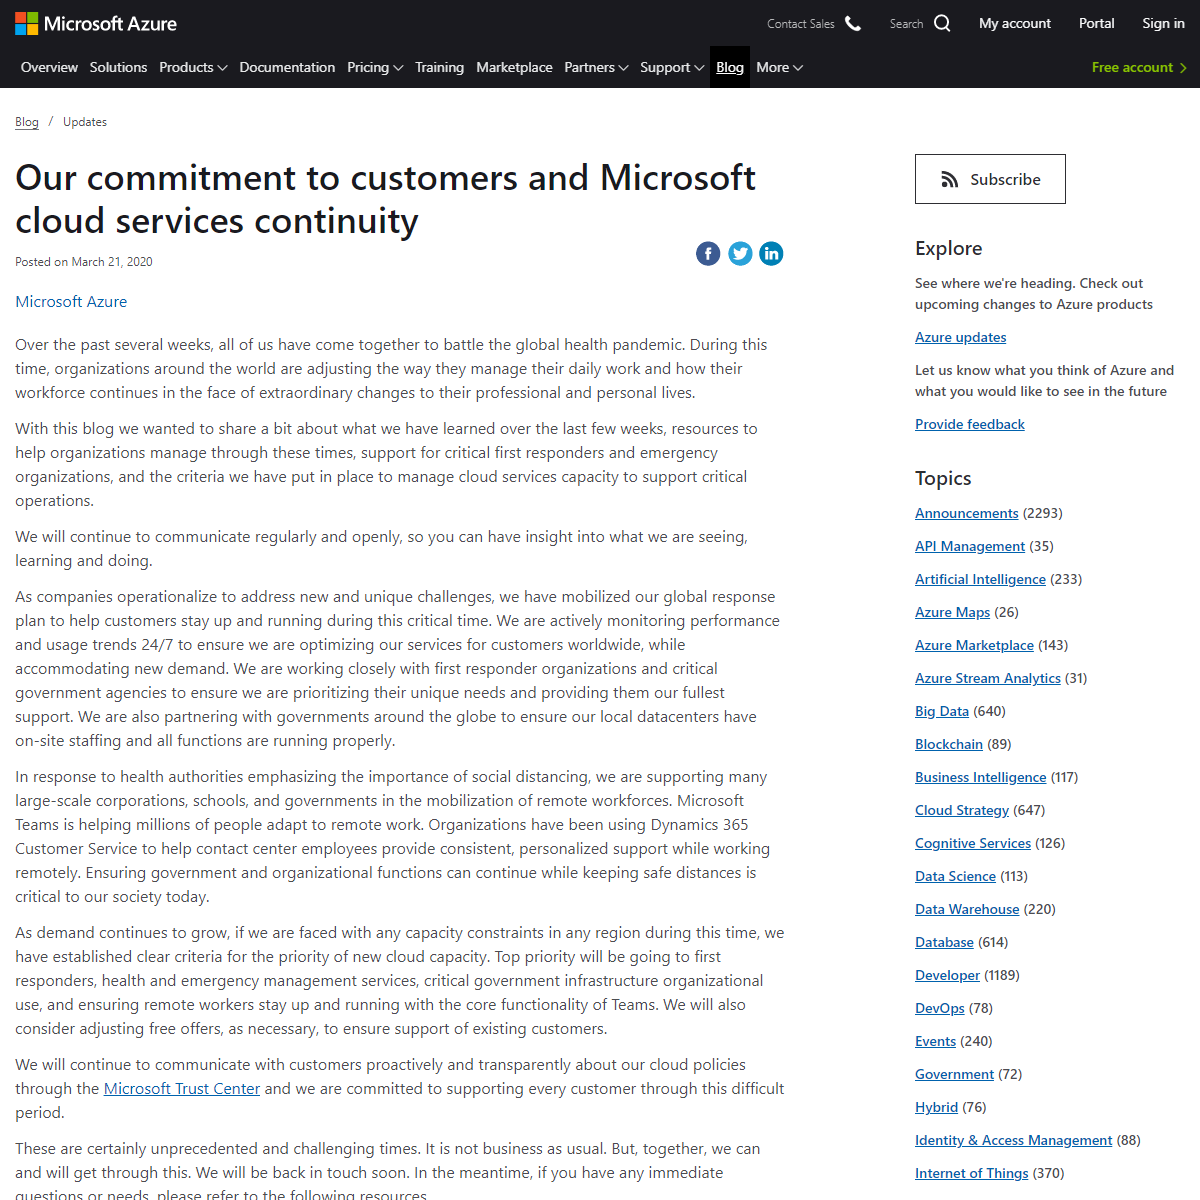 Our commitment to customers and Microsoft cloud services continuity - Azure Blog and Updates - Microsoft Azure